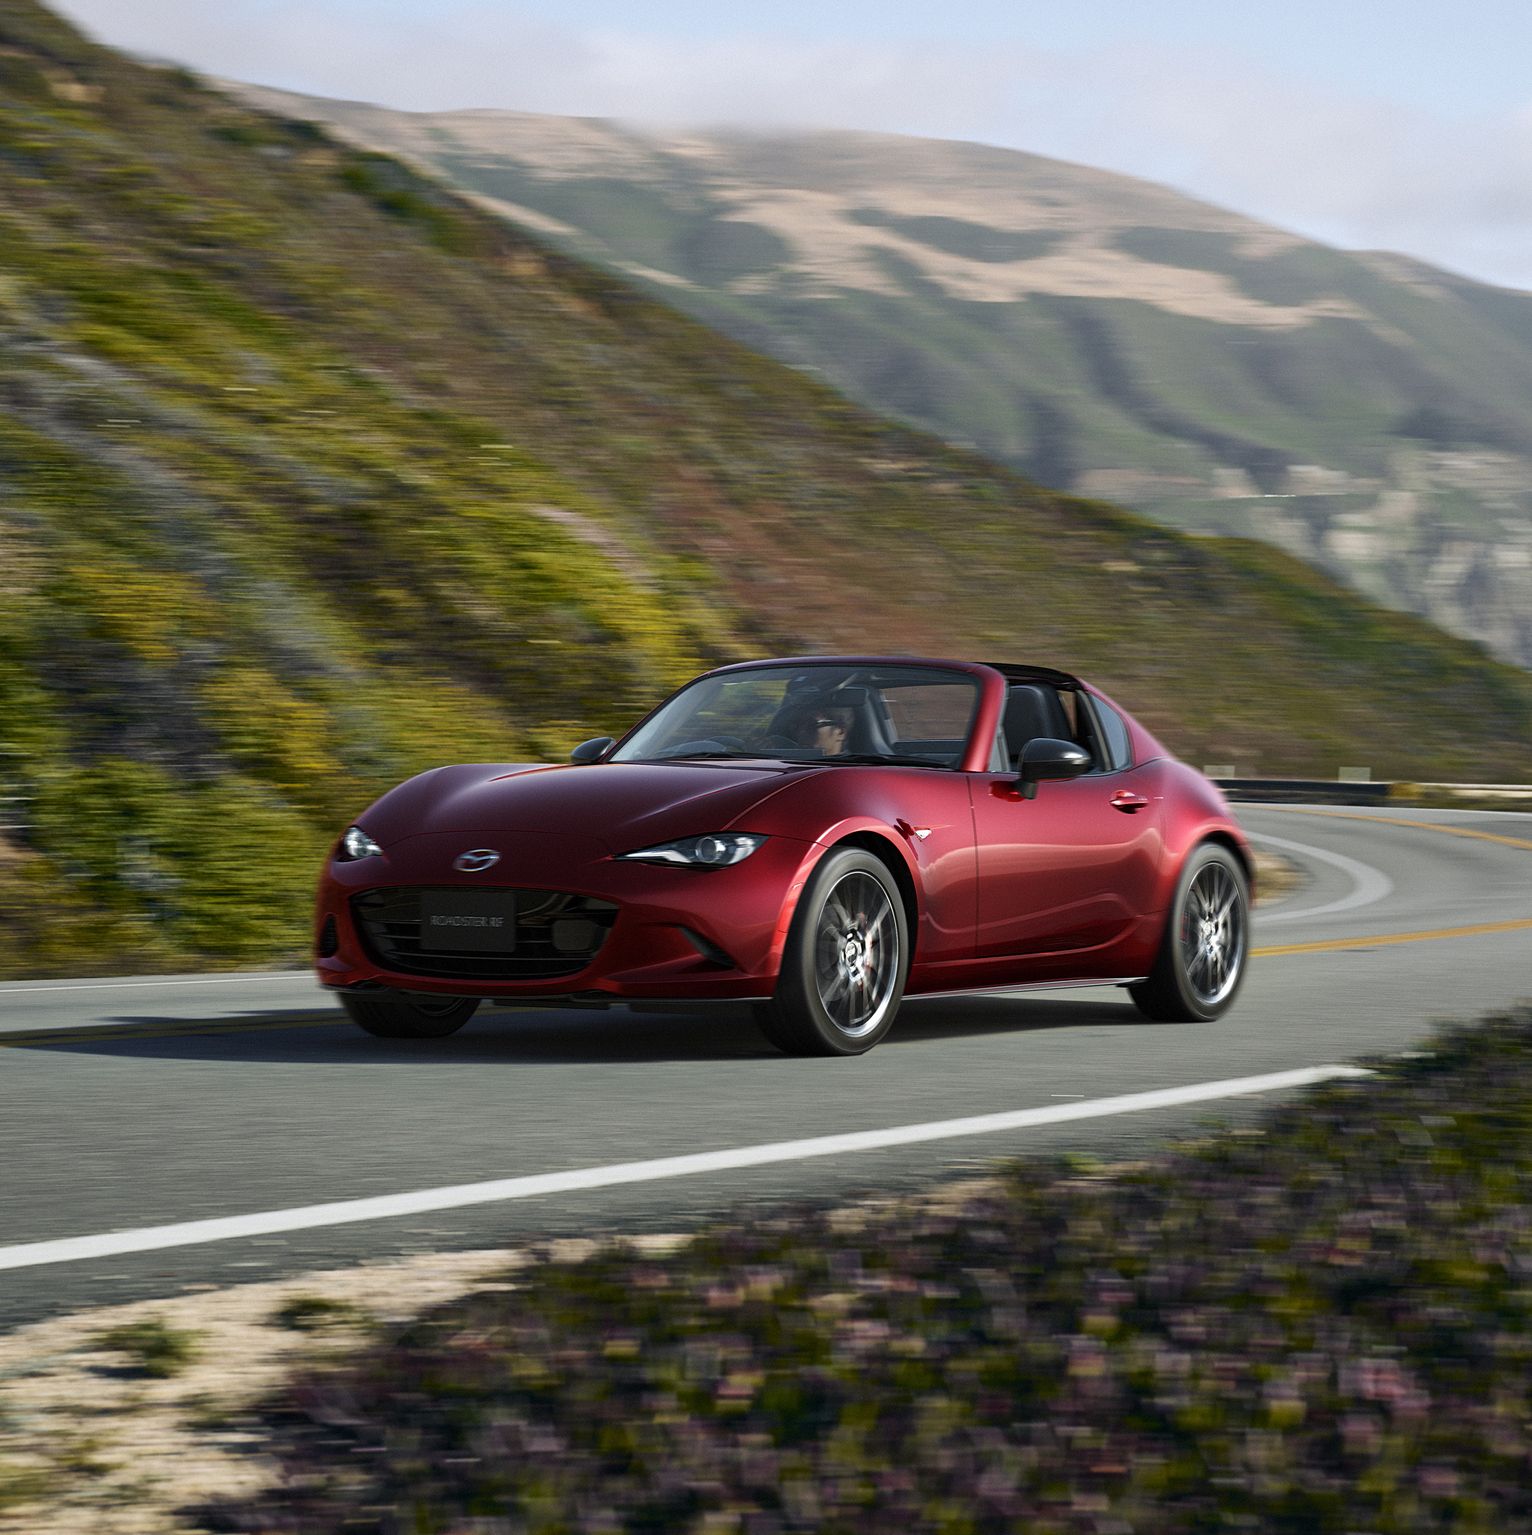 Mazda Just Made a Number of Updates to the ND MX-5 Miata